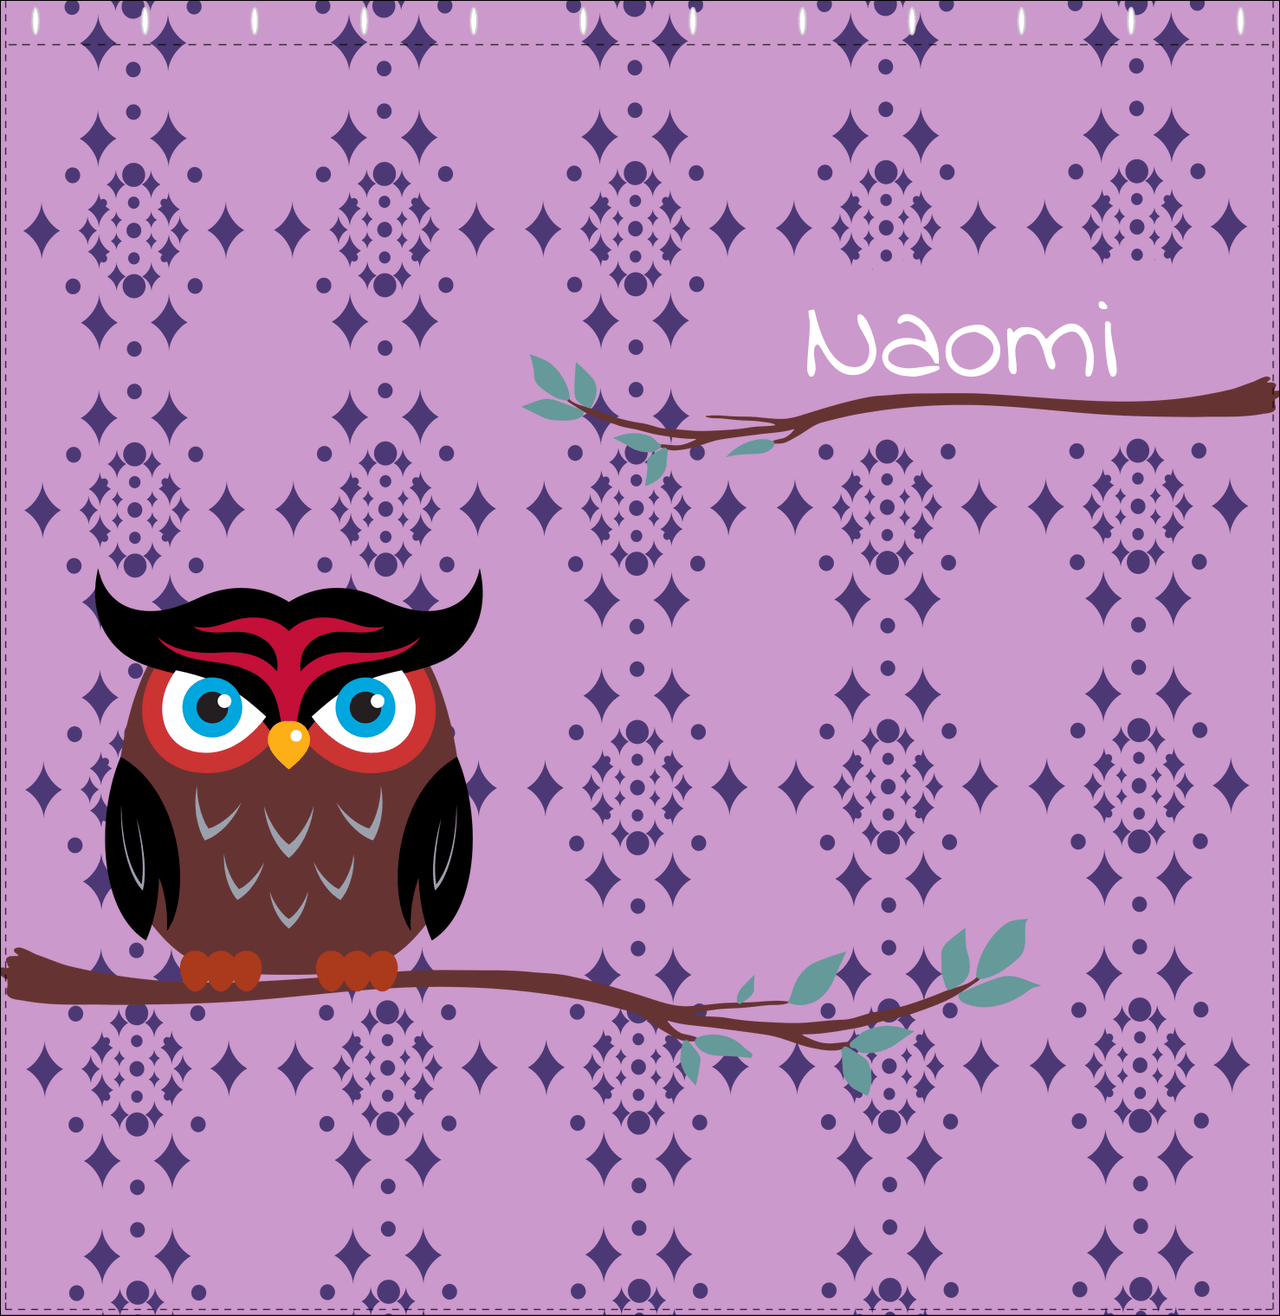 Personalized Owl Shower Curtain I - Owl 02 - Pink Background - Decorate View